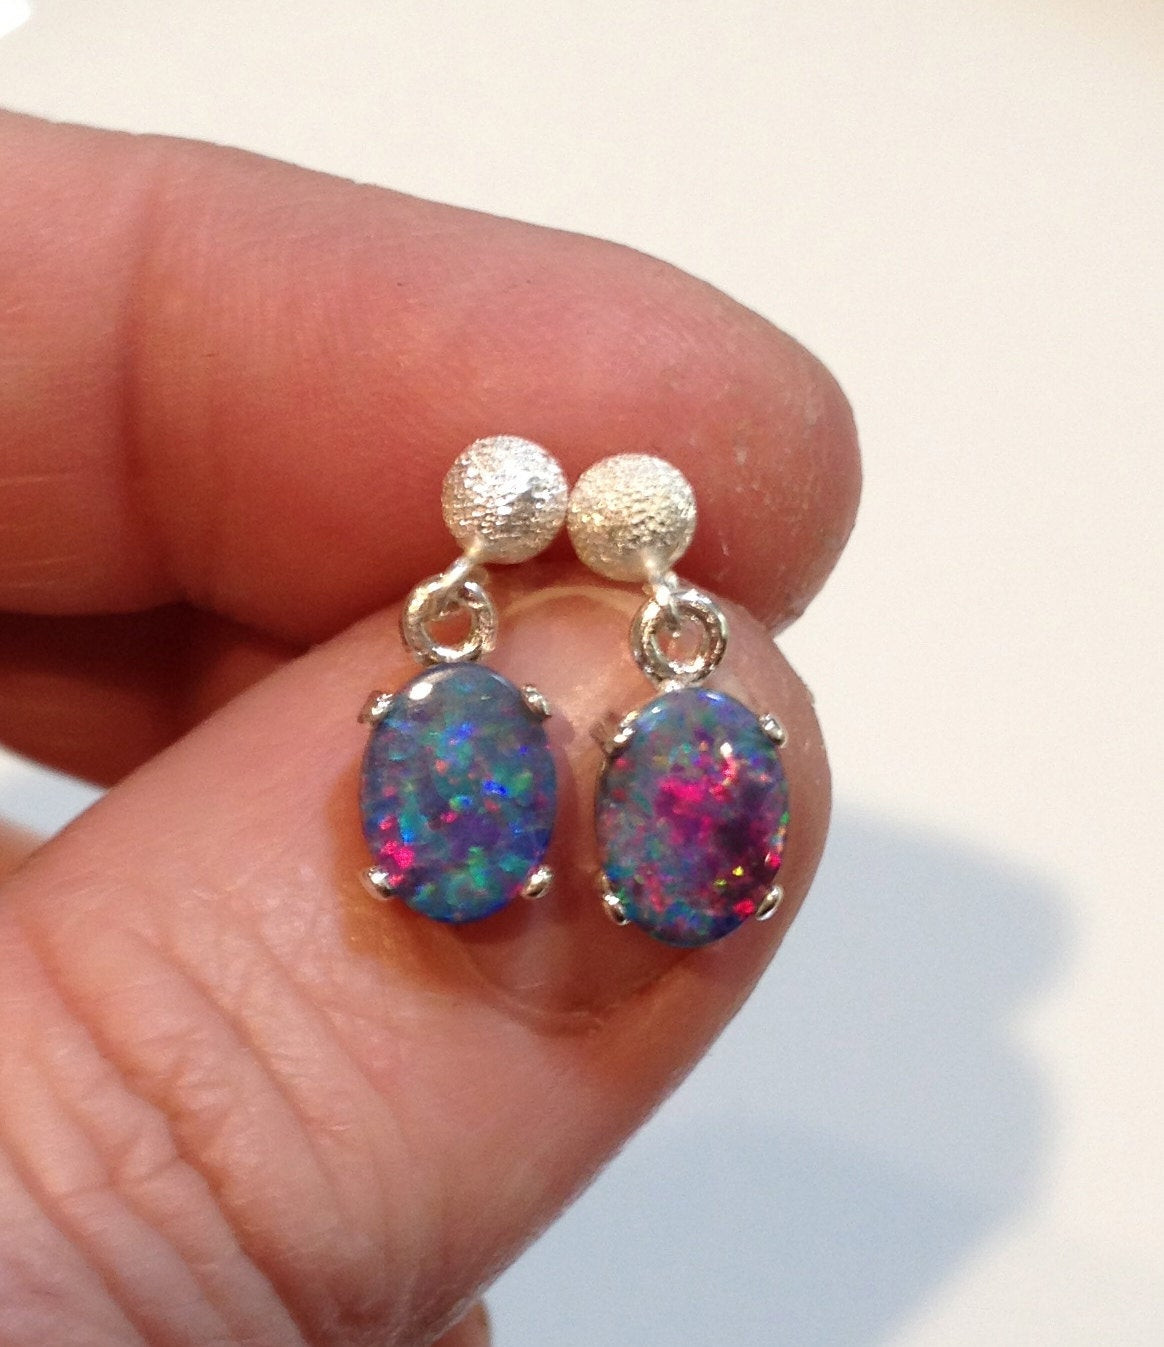 Australian Opal Earrings
 Australian Opal Earrings Best Quality Silver Studs Lots